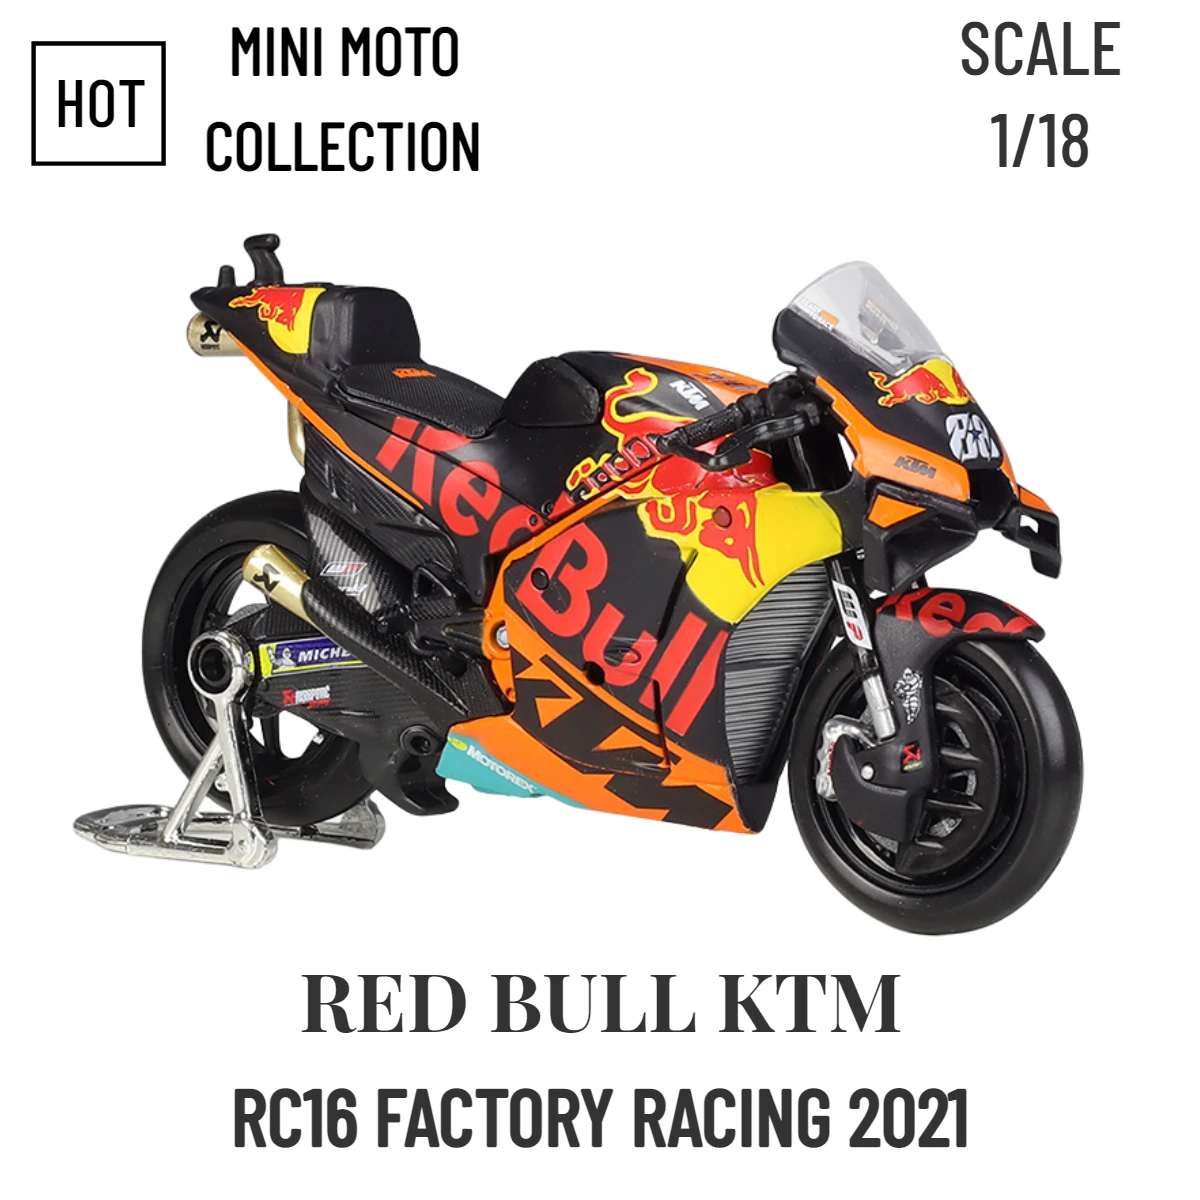 

Maisto 1:18 Scale Mini Moto Red Bull KTM Ducati Motogp Motorcycle Model Toy Collectible Xmas Kids Room Decor Gift Toys for Boys